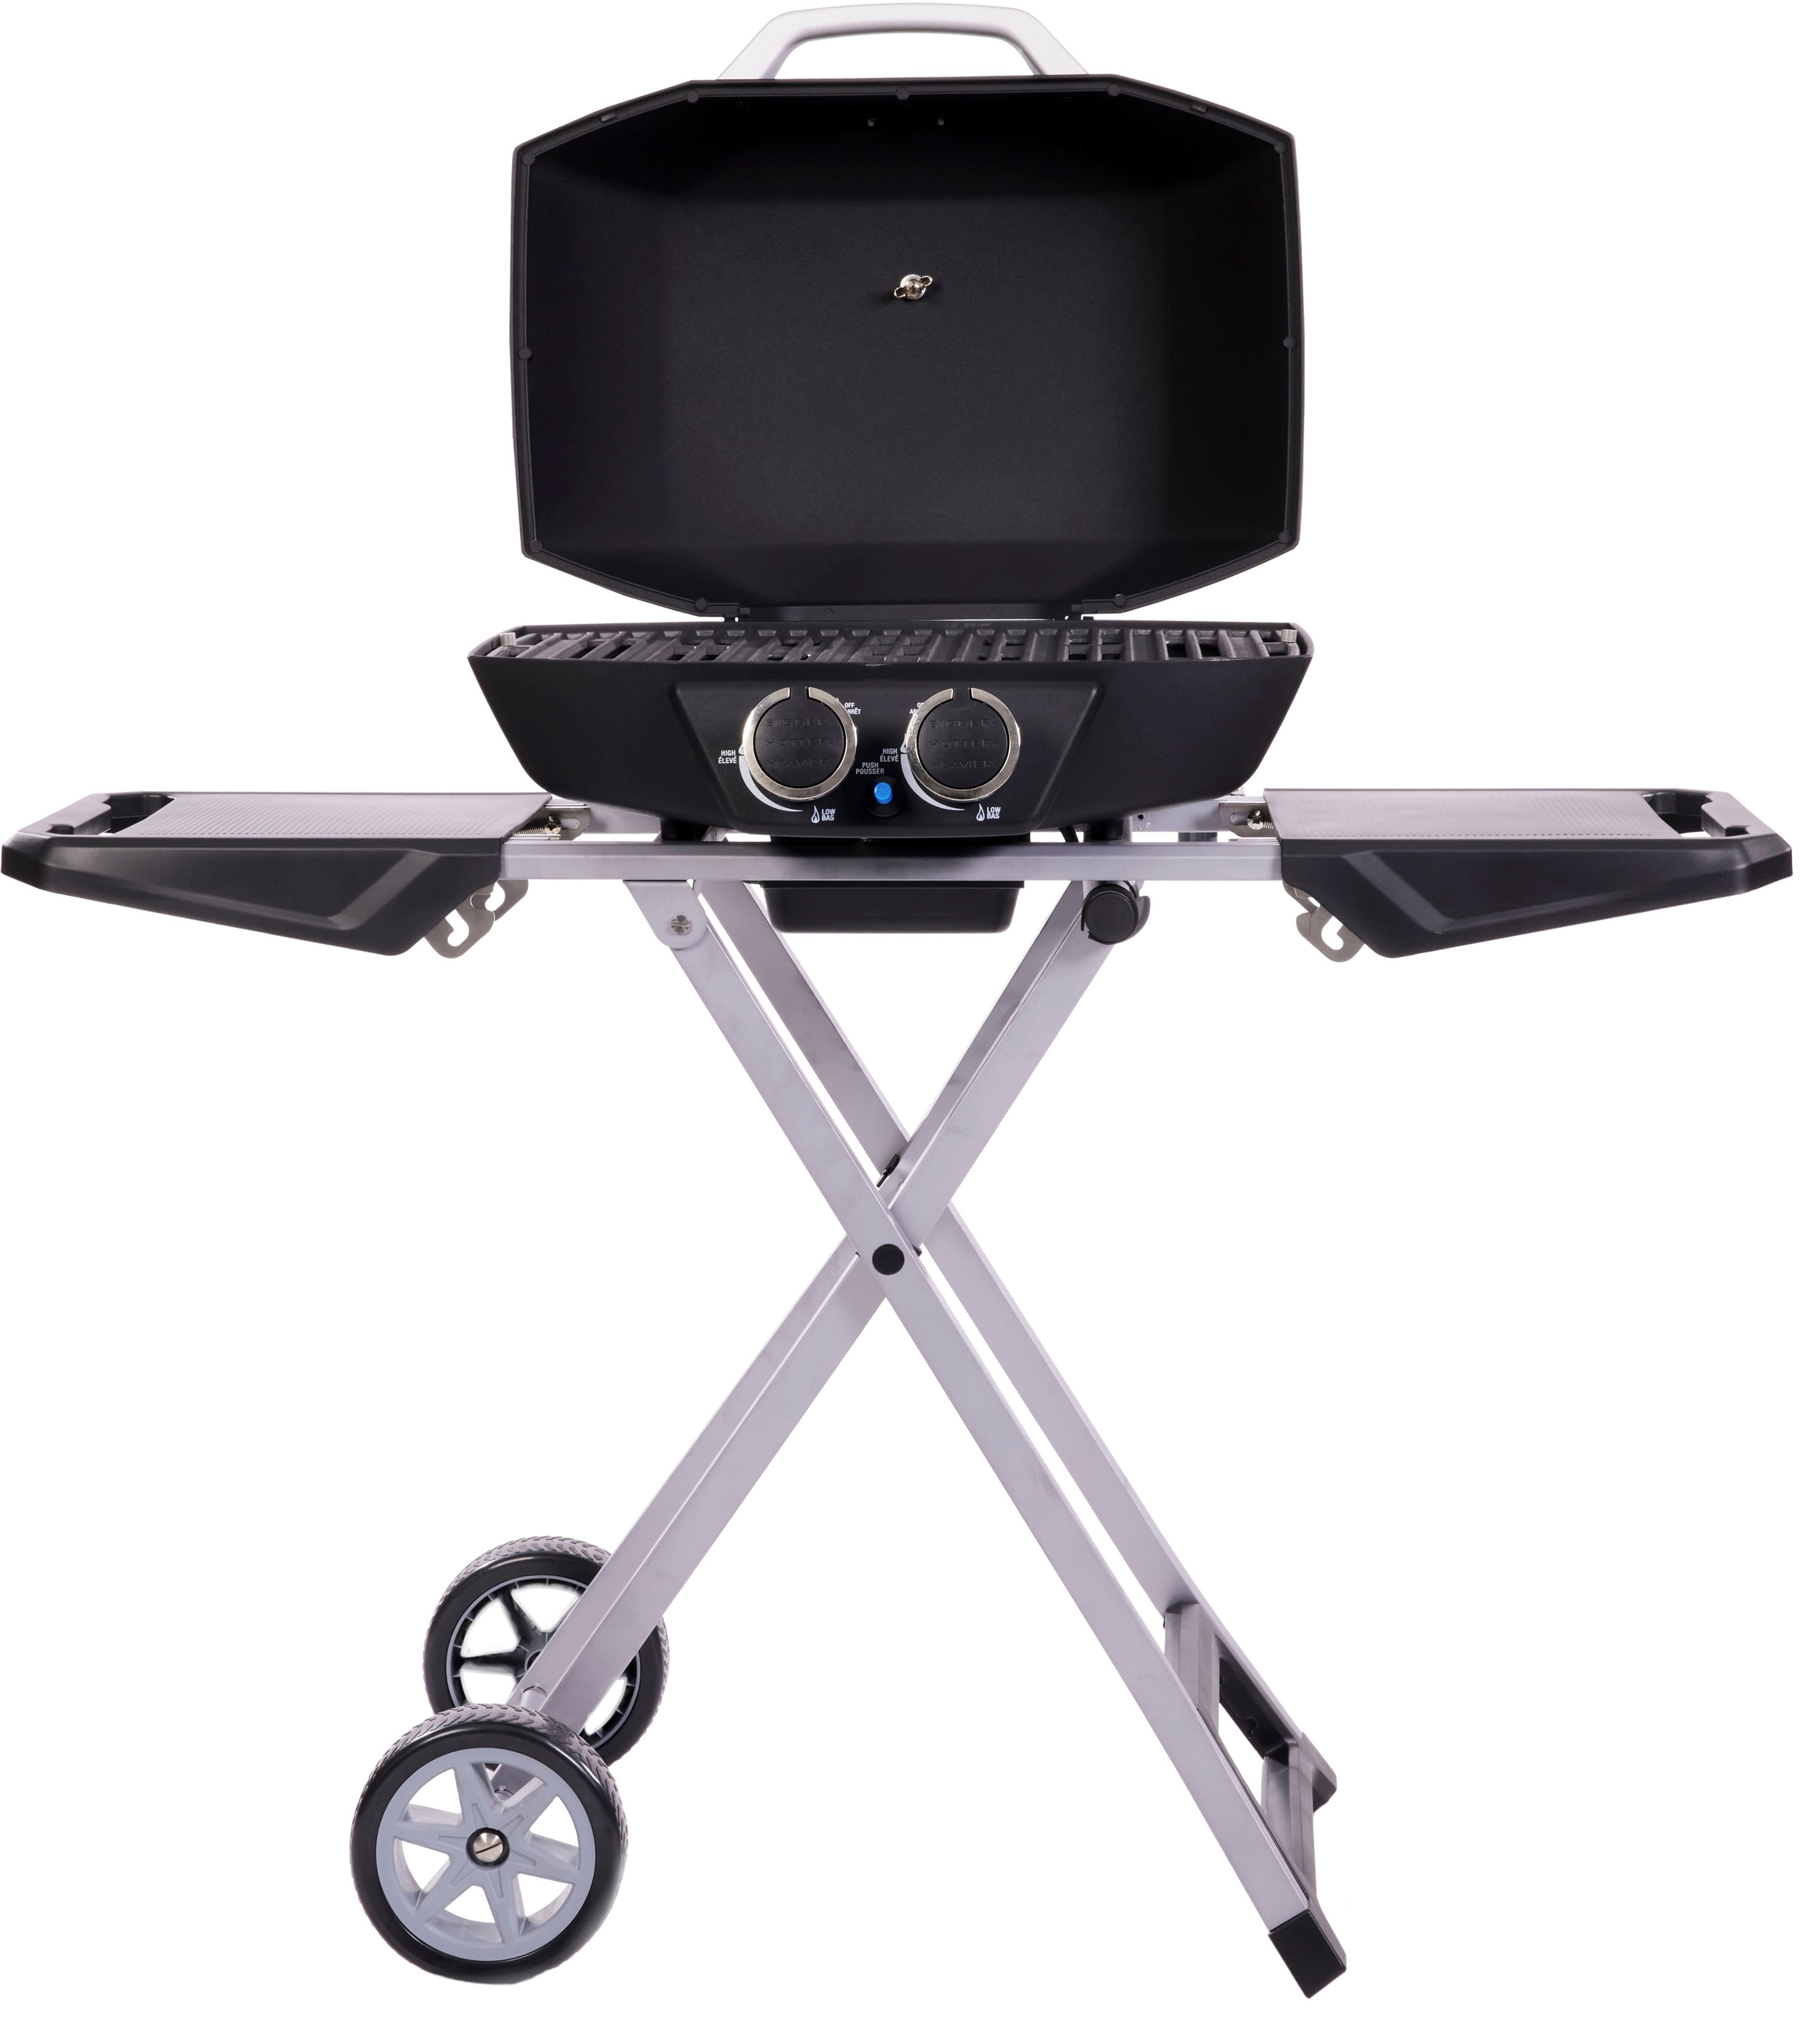 Pit Boss 2 Burner Portable GAS Grill with Collapsible Cart Black